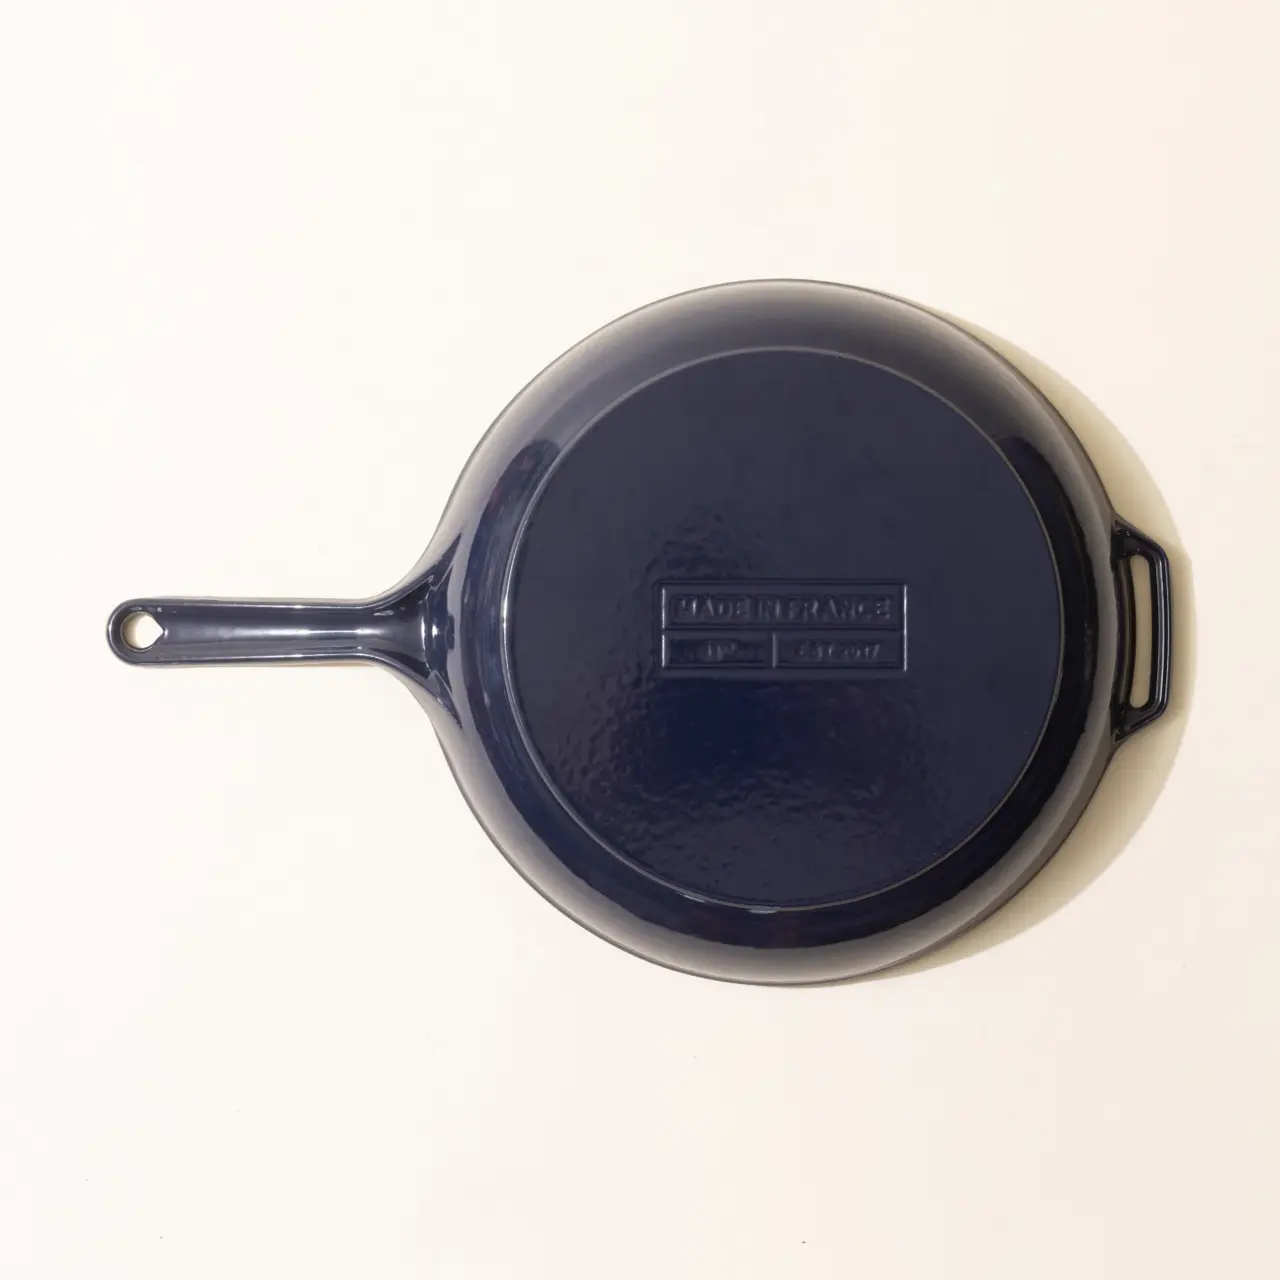 A navy blue cast iron skillet with a handle and an opposite side grip lies against a plain background.